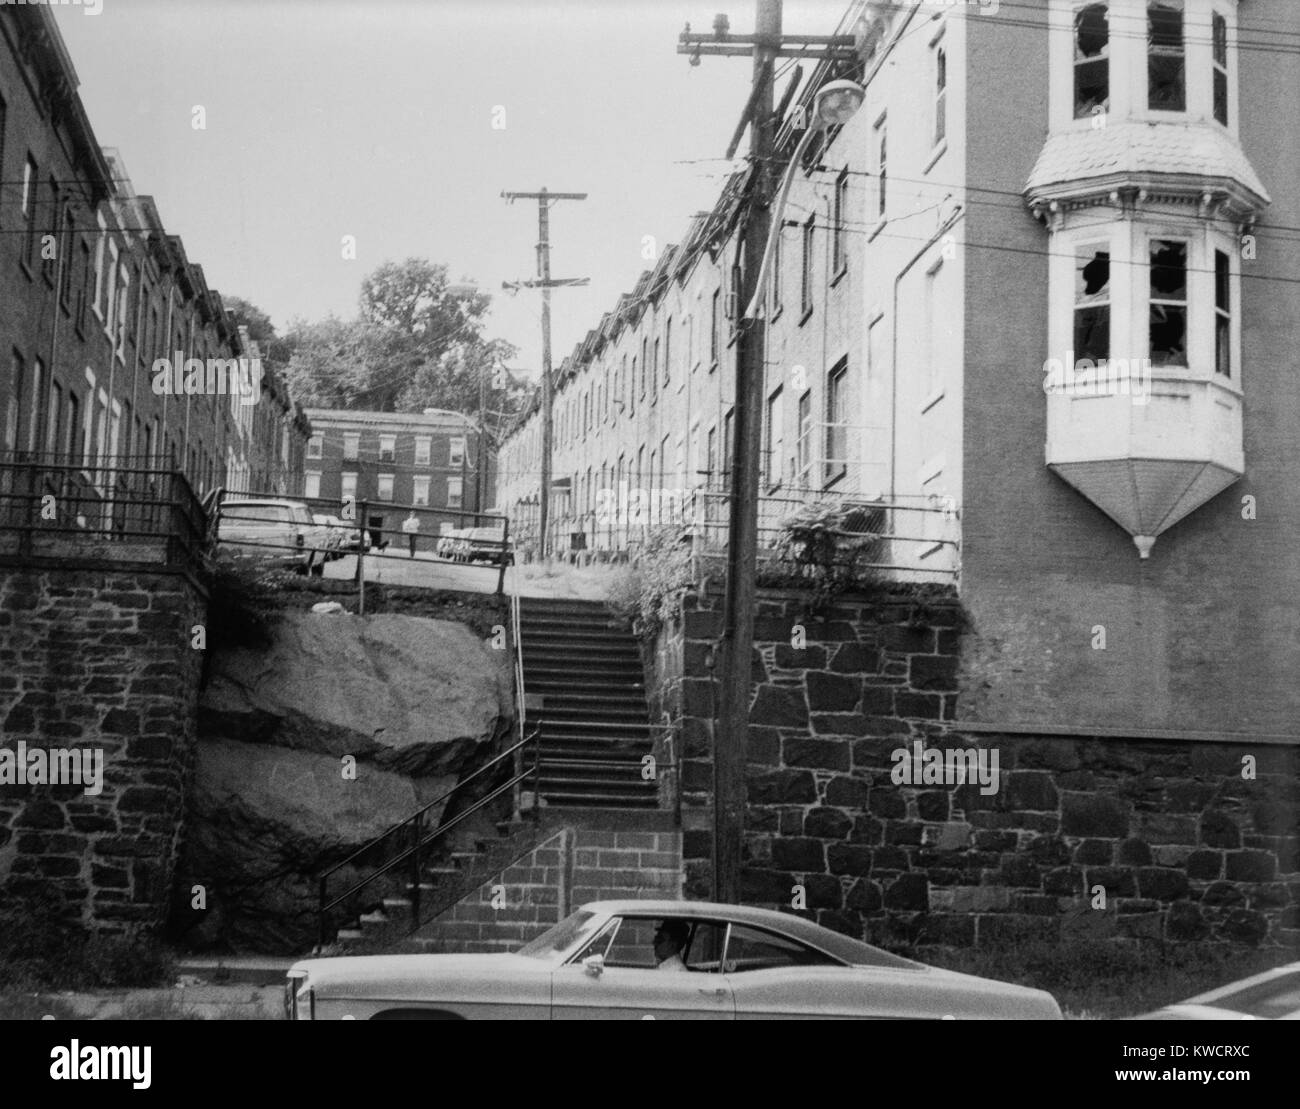 Yonkers, New York, ca. 1980. Moquette Row Housing, are 18th century industrial housing built for workers of Moquette Textile Mills in the 1880's. View west showing front elevation and original end structures. Westchester County, NY. (BSLOC 2015 11 10) Stock Photo